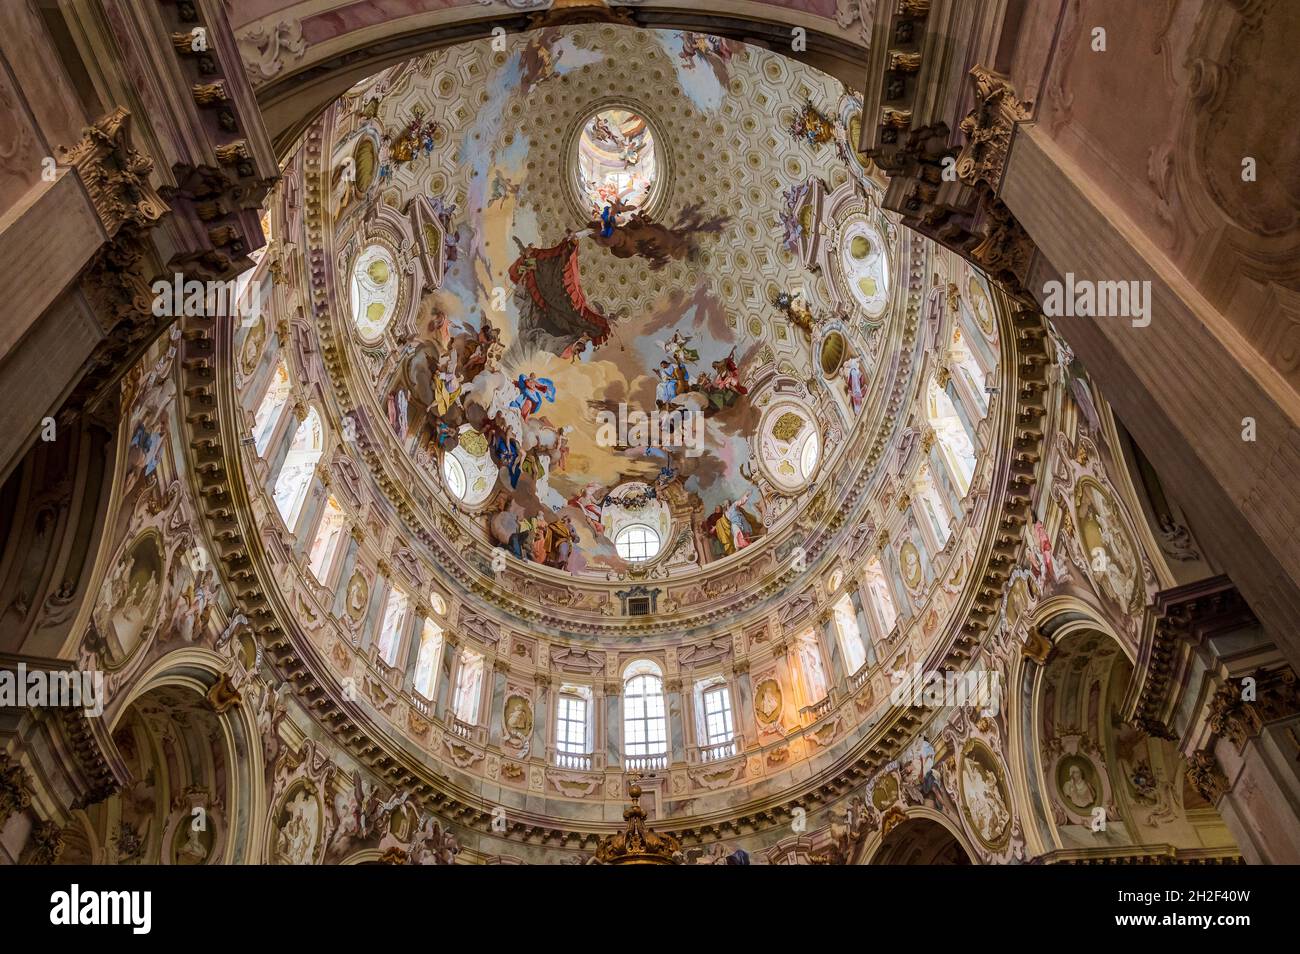 The Santuario Regina Montis Regalis is a monumental church located in Vicoforte, Piedmont, Italy. It is known for having the largest elliptical cupola Stock Photo